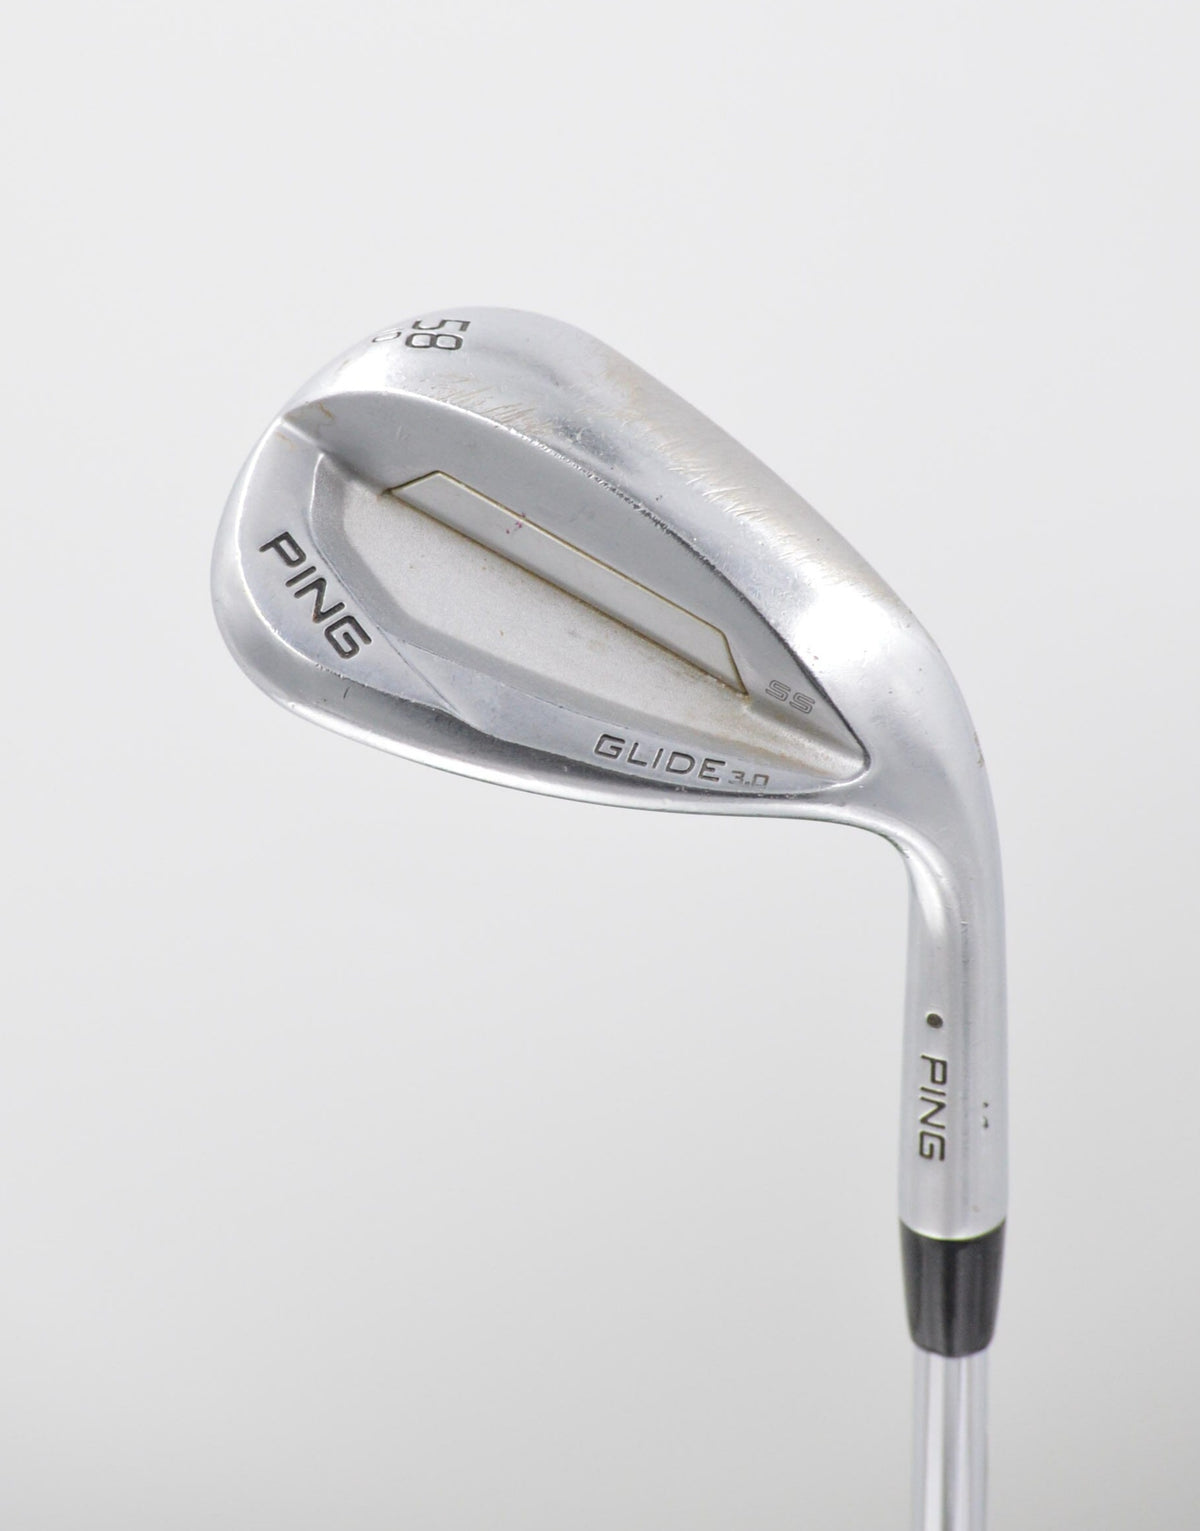 Ping Glide 3.0 SS 58 Degree Wedge Wedge Flex Golf Clubs GolfRoots 